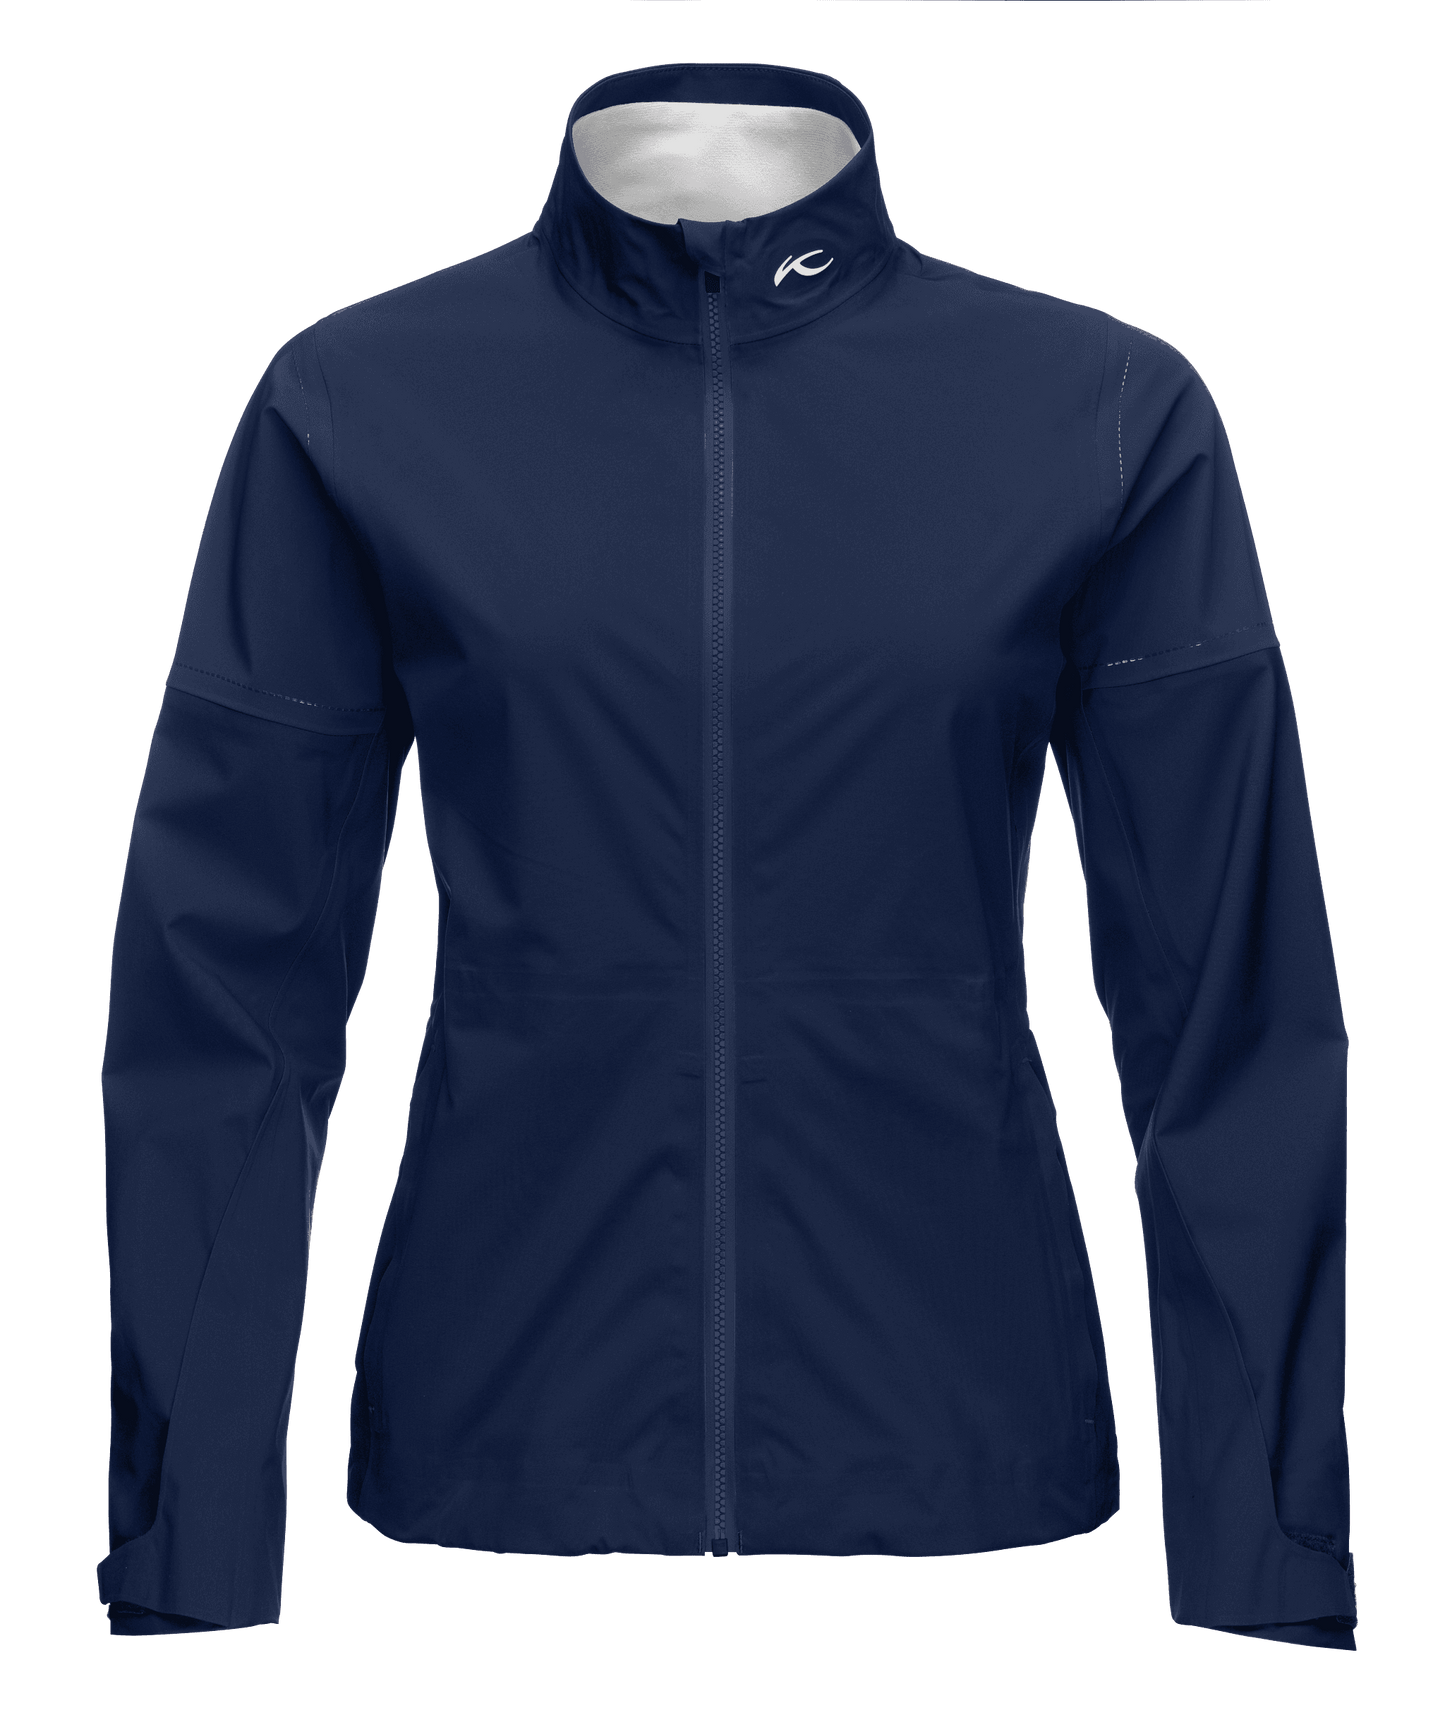 Women Pro 3L Jacket by Kjus - The Luxury Promotional Gifts Company Limited